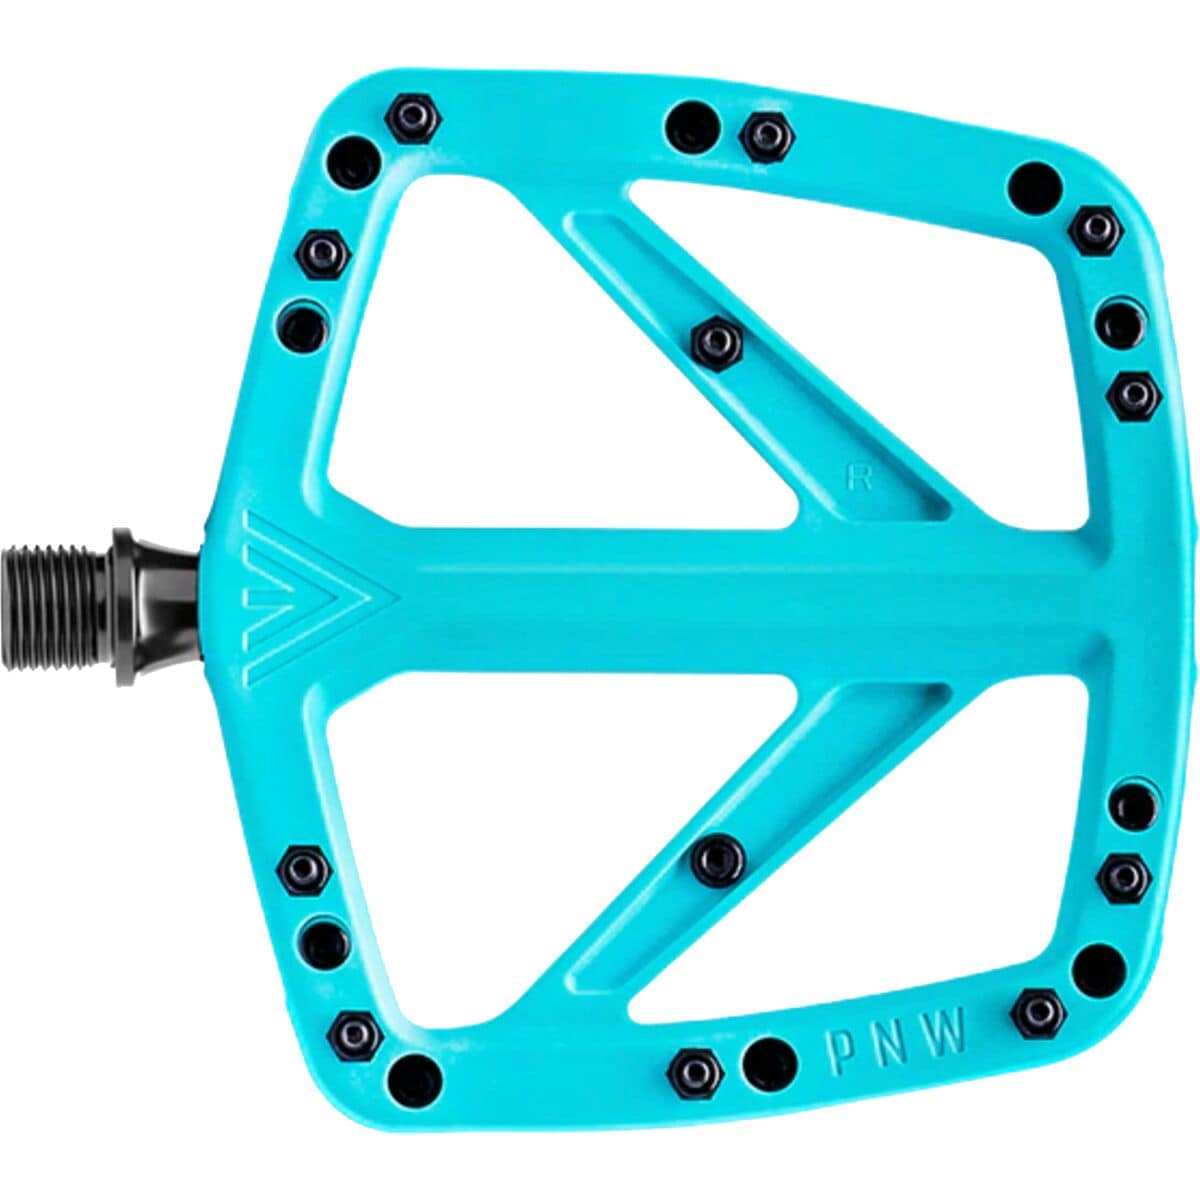 PNW Components Range Pedals Seafoam Teal, One Size